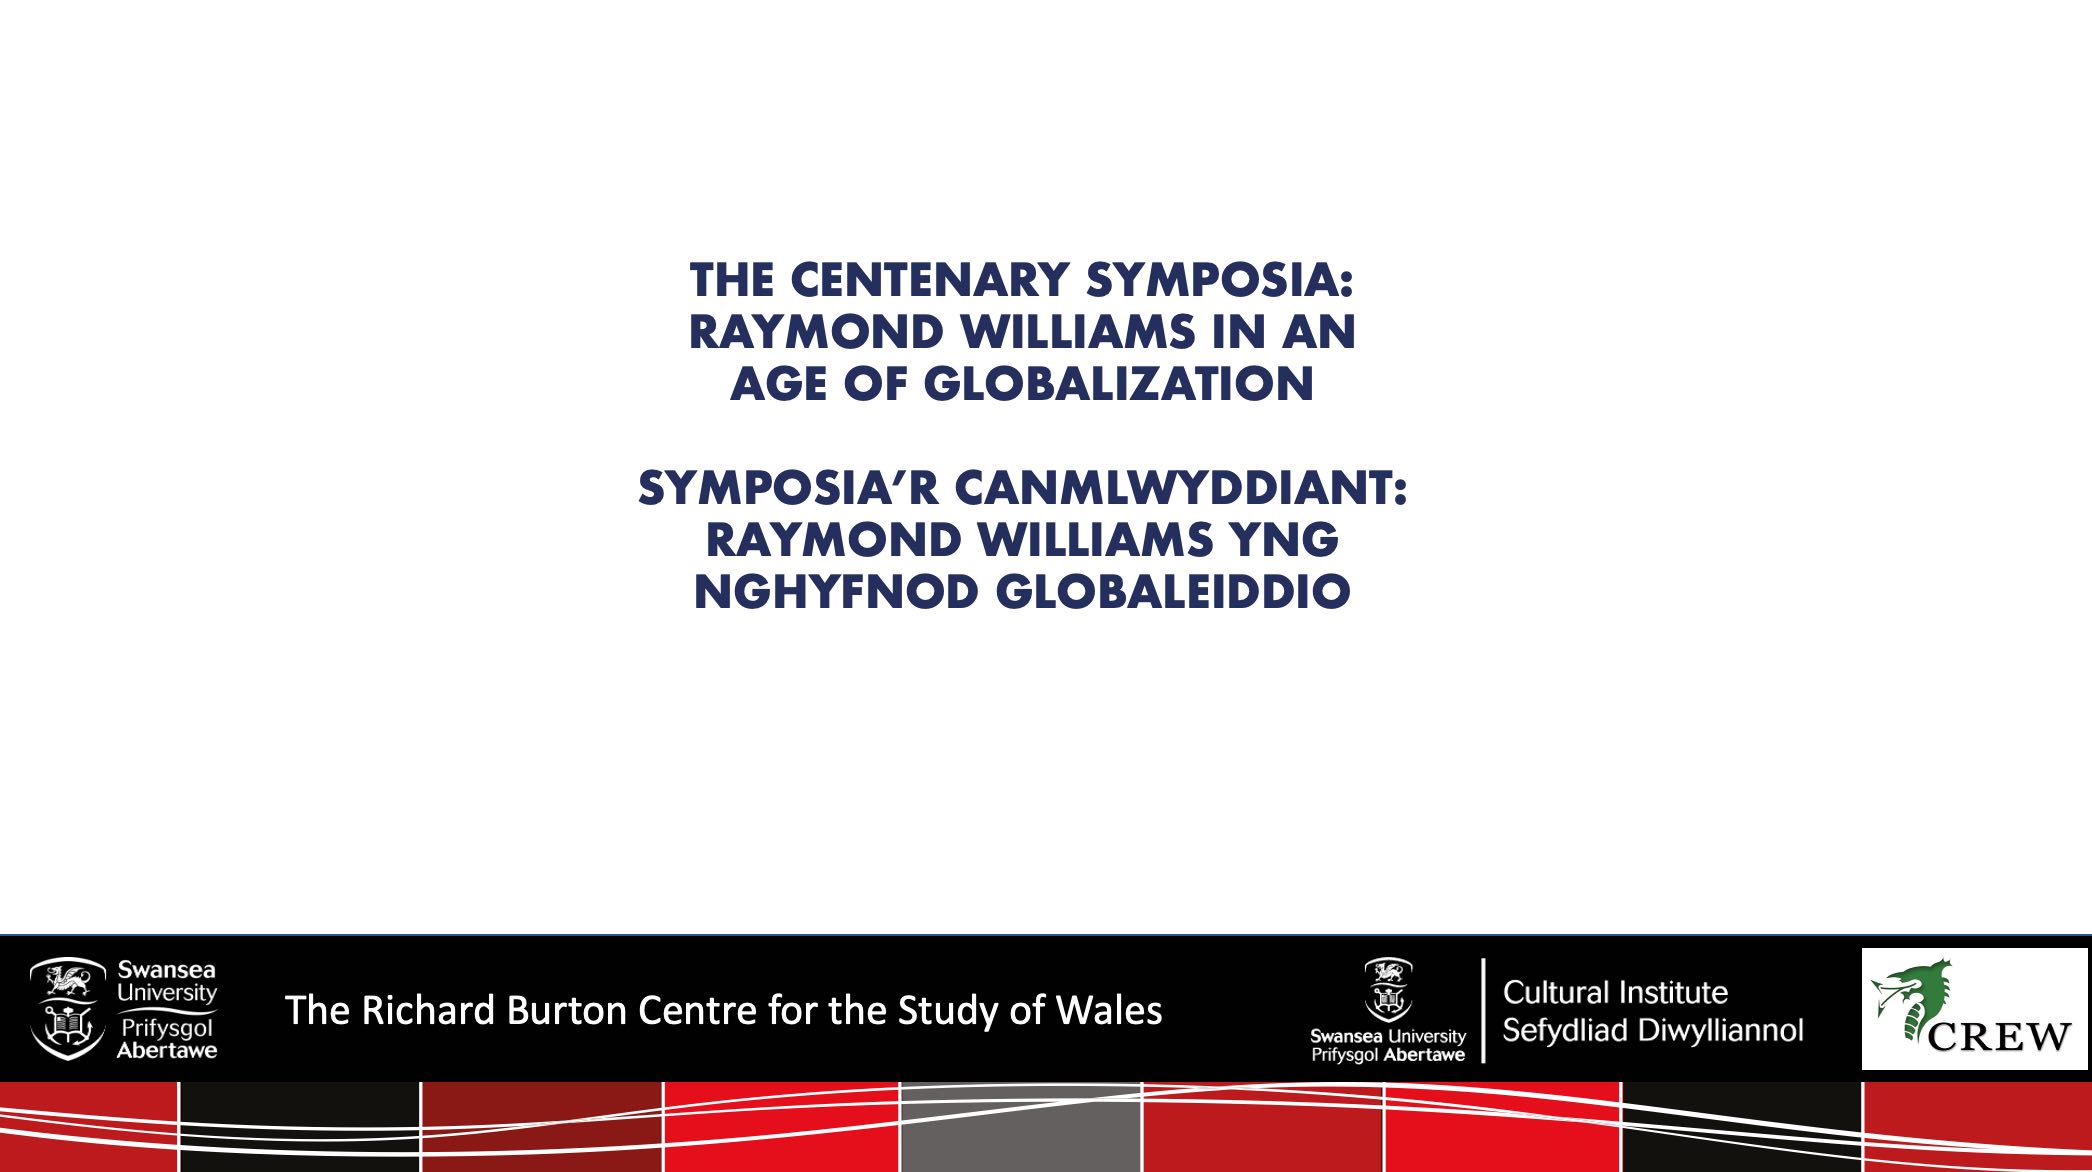 This is an image of the title page of the Raymond Williams centenary recordings